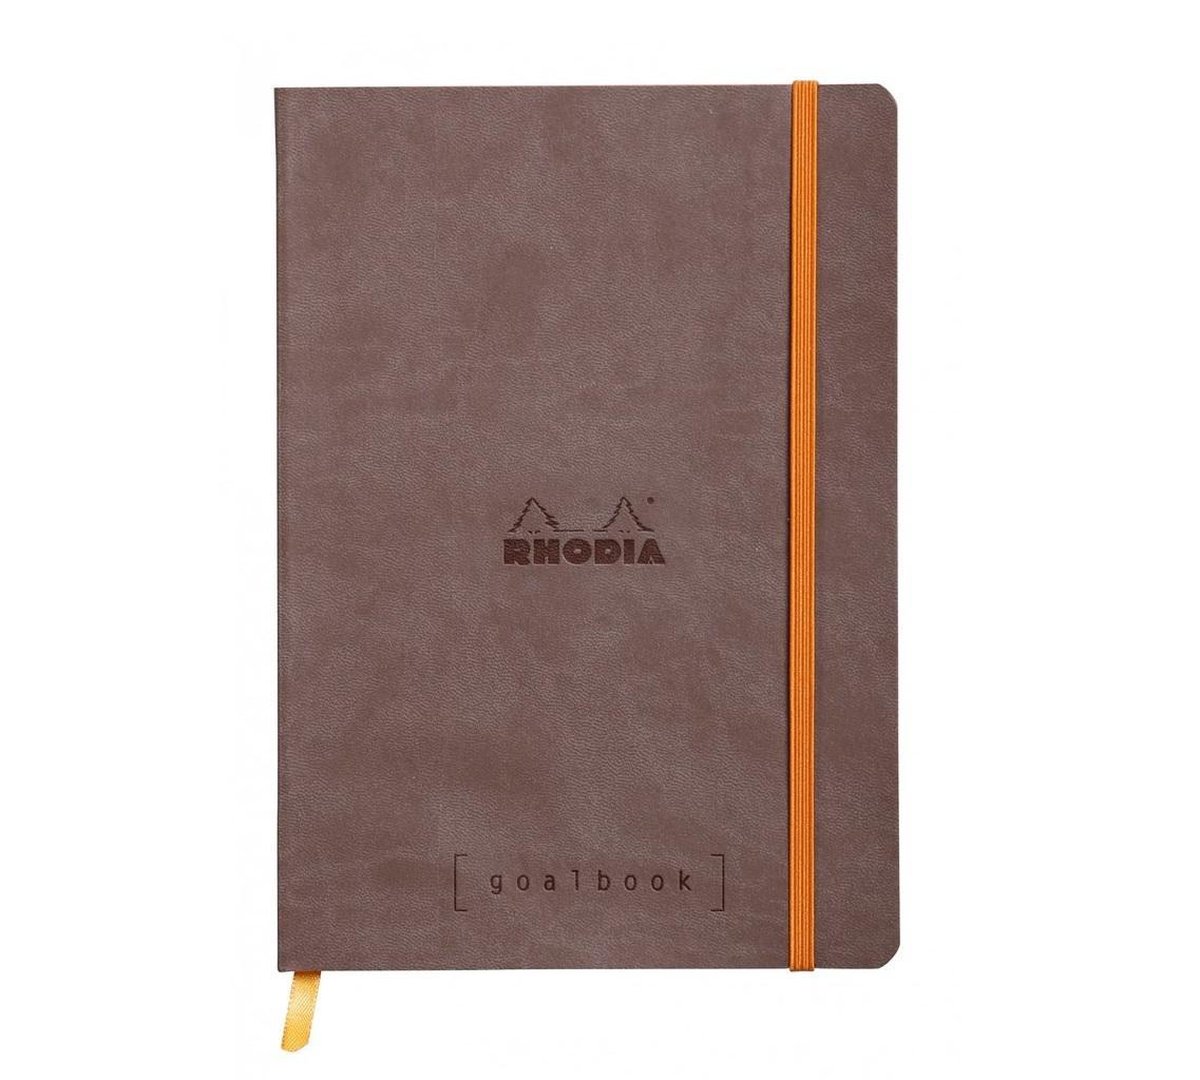 Rhodia Goalbook – Bullet Journal – A5 – 14,8x21cm – Softcover – Gestippeld – Dotted – Chocolade Bruin